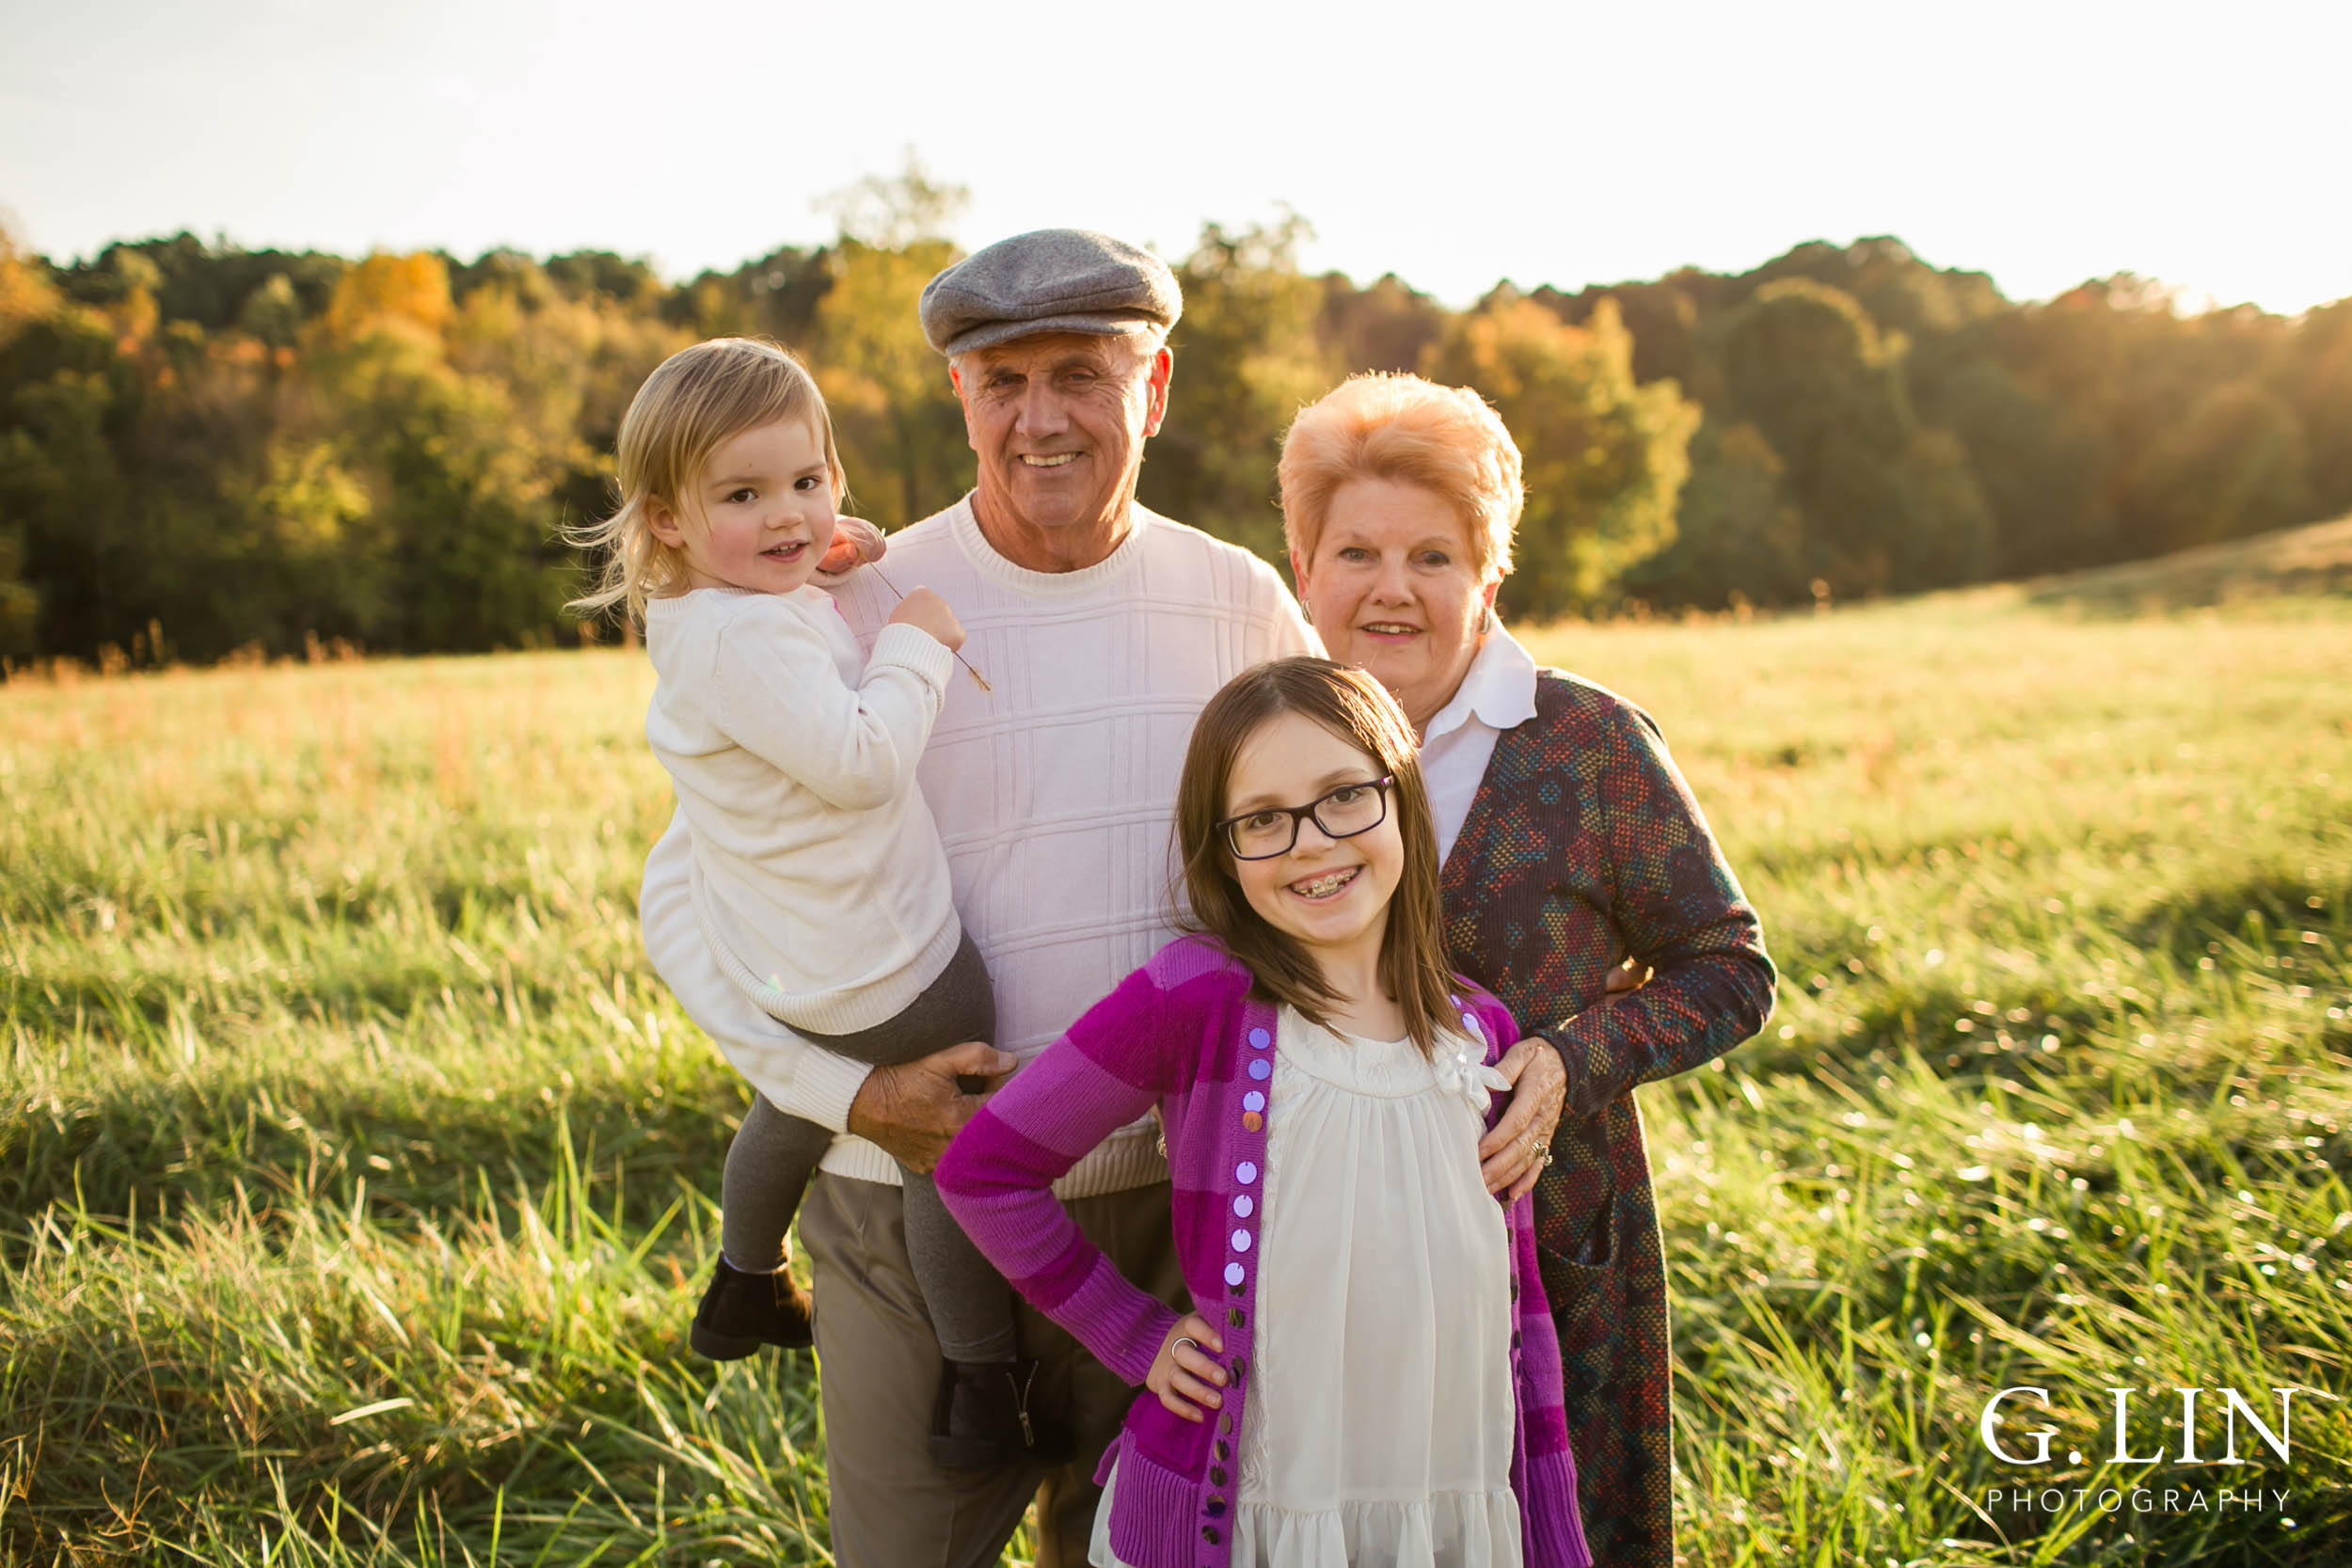 Gorgeous photo of grandkids with grandparents in open field | Raleigh Family Photographer | G. Lin Photography